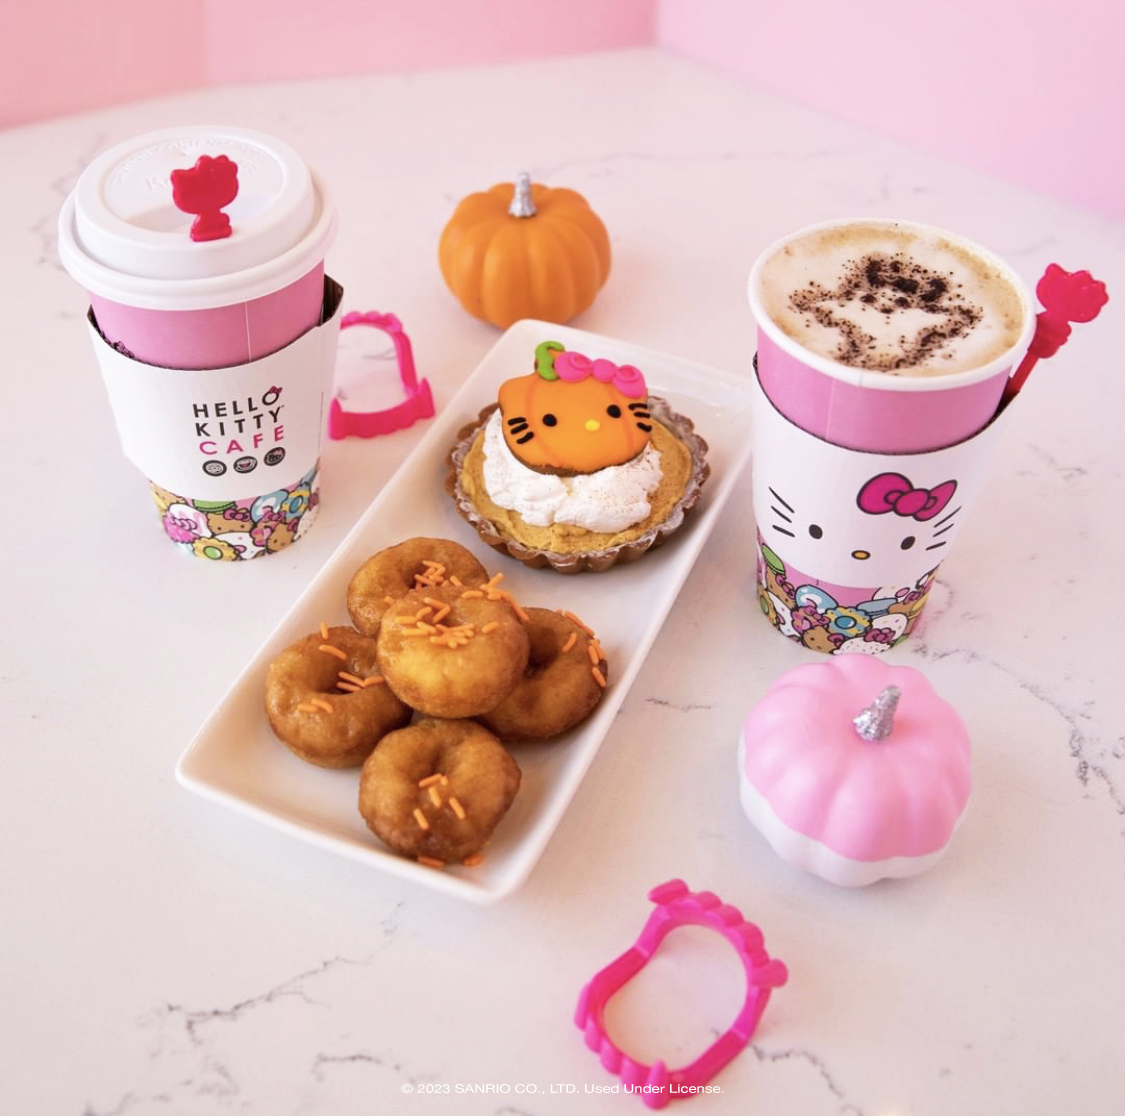 Hello pumpkin, it's #NationalDessertDay! 🎃🎀 Which yummy treat from our seasonal menu is your fave: pumpkin tart, maple glazed mini donuts, or the pumpkin spice latte? ⁠ ⁠ Available the Hello Kitty Grand Cafe for a limited time! 🧡